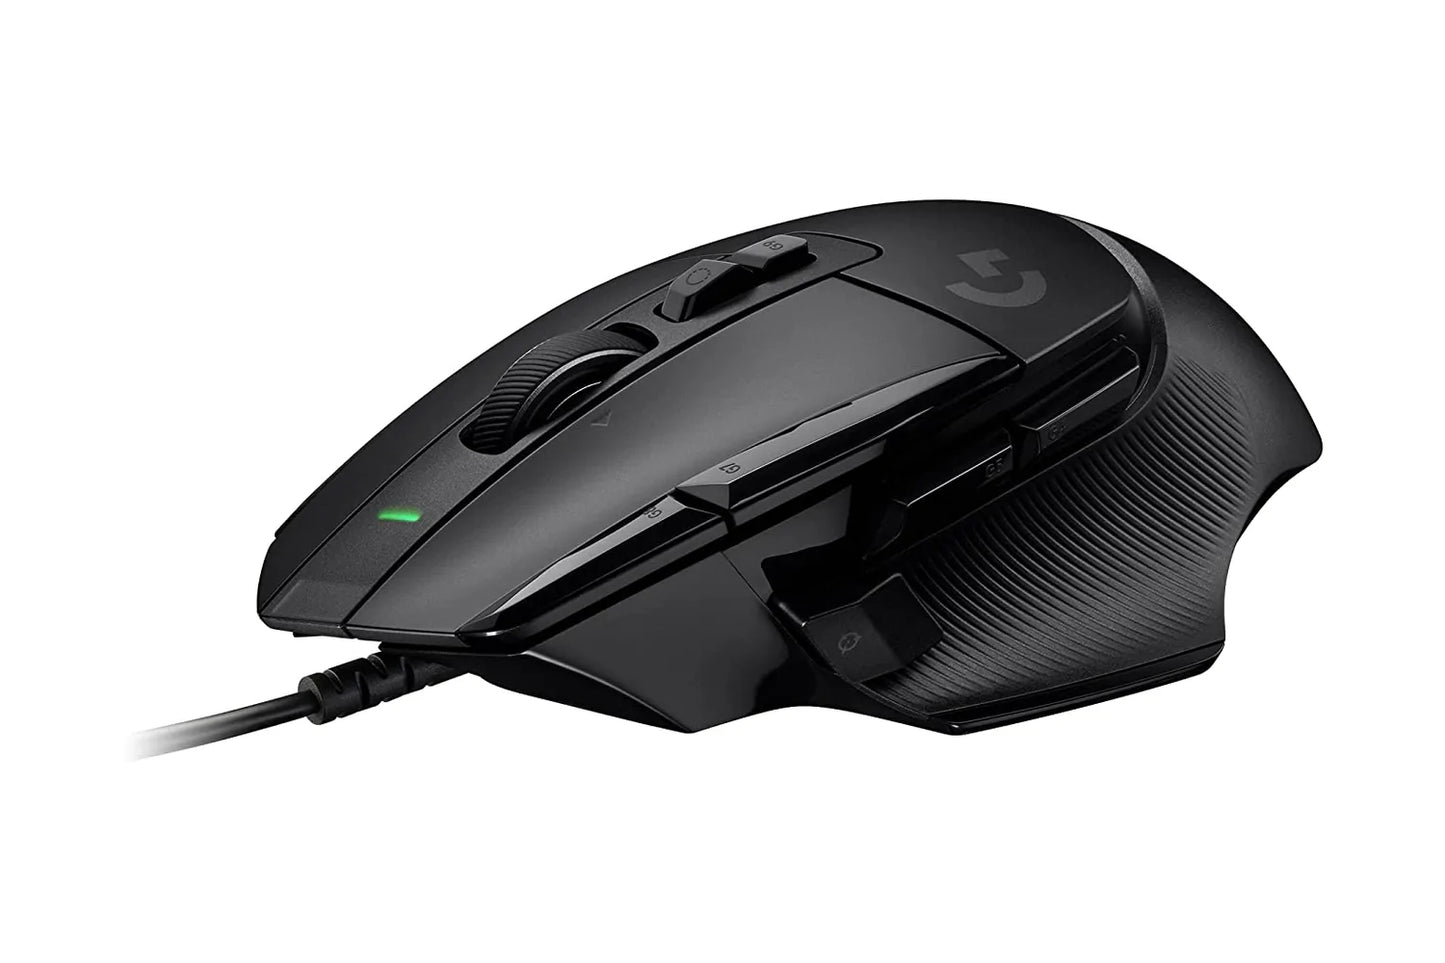 Logitech G502 X Wired Gaming Mouse - LIGHTFORCE Hybrid Optical-Mechanical Primary switches, Hero 25K Gaming Sensor, Compatible with PC/macOS/Windows - White-MOUSE-Logitech-Black-computerspace